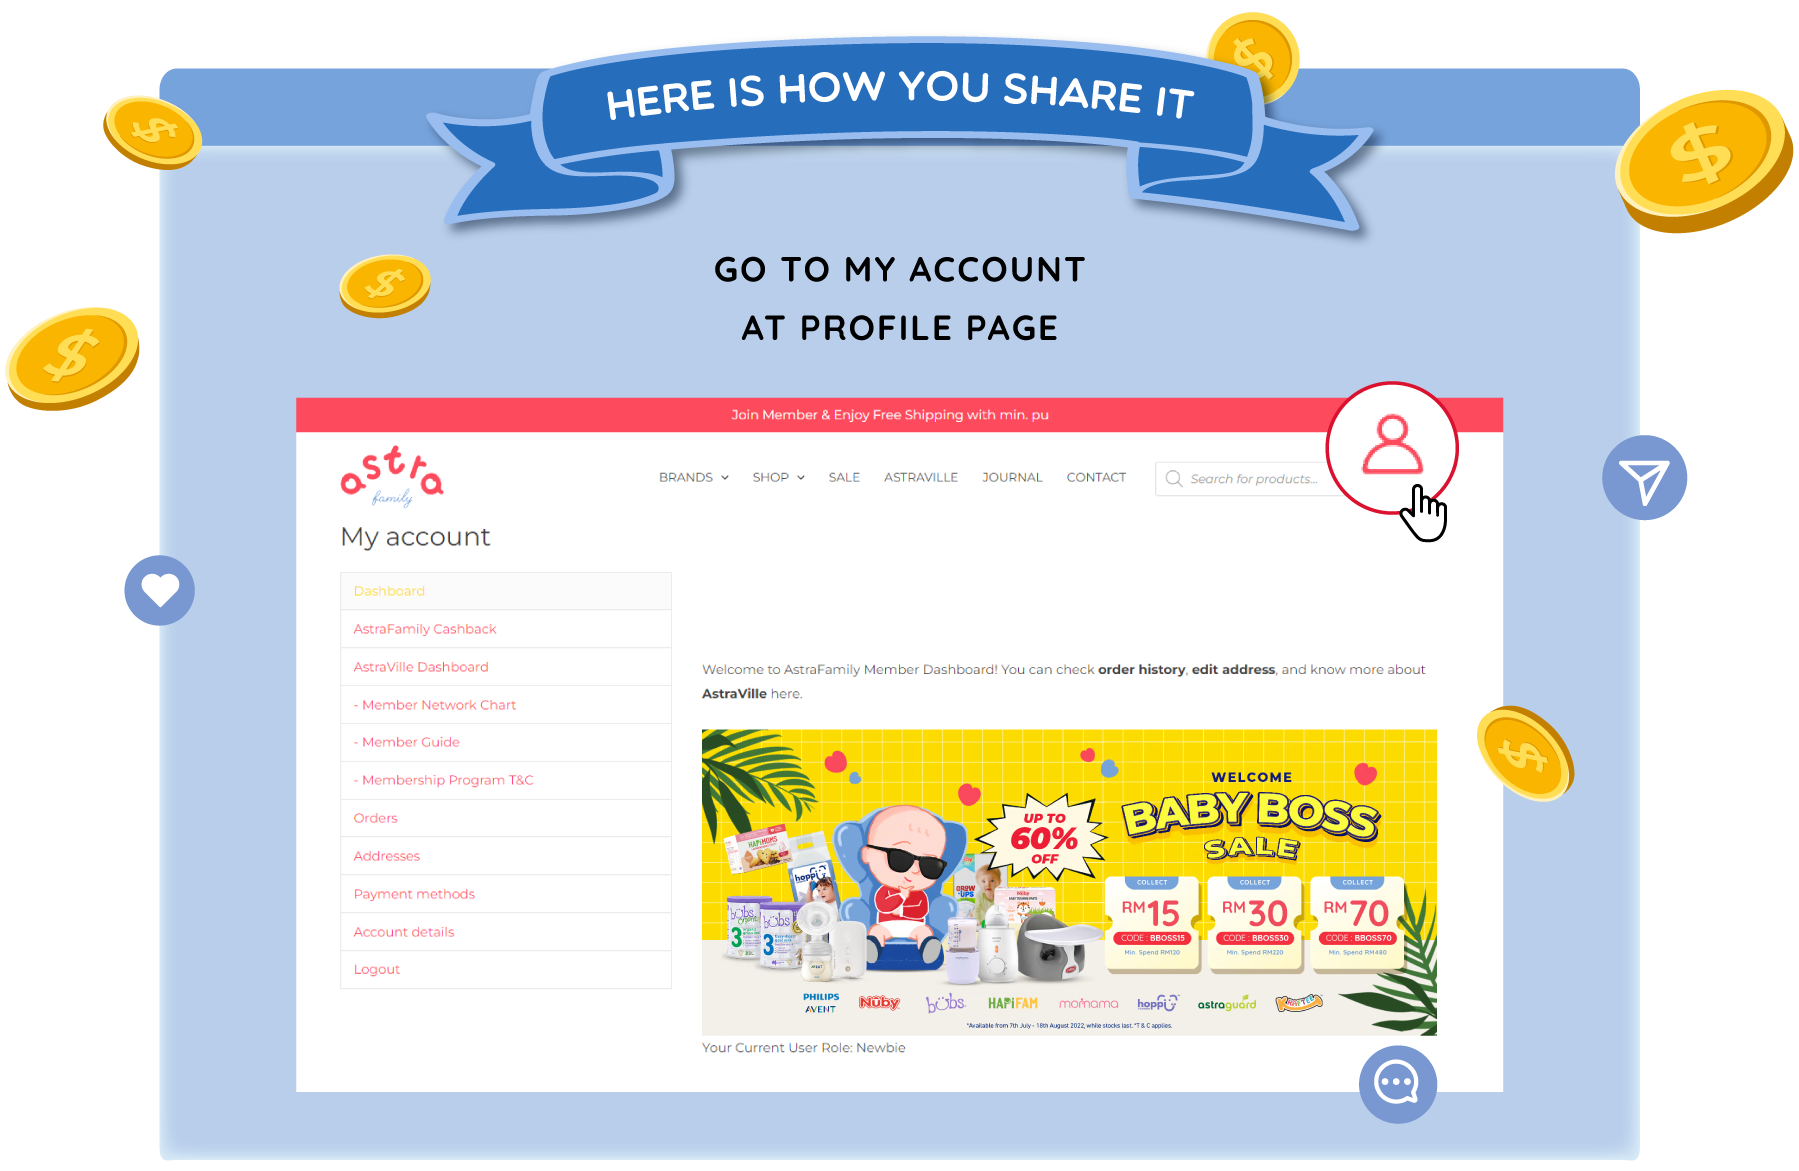 Astra Family A page that guides users on how to Share and Earn rewards by accessing their account on the people page.